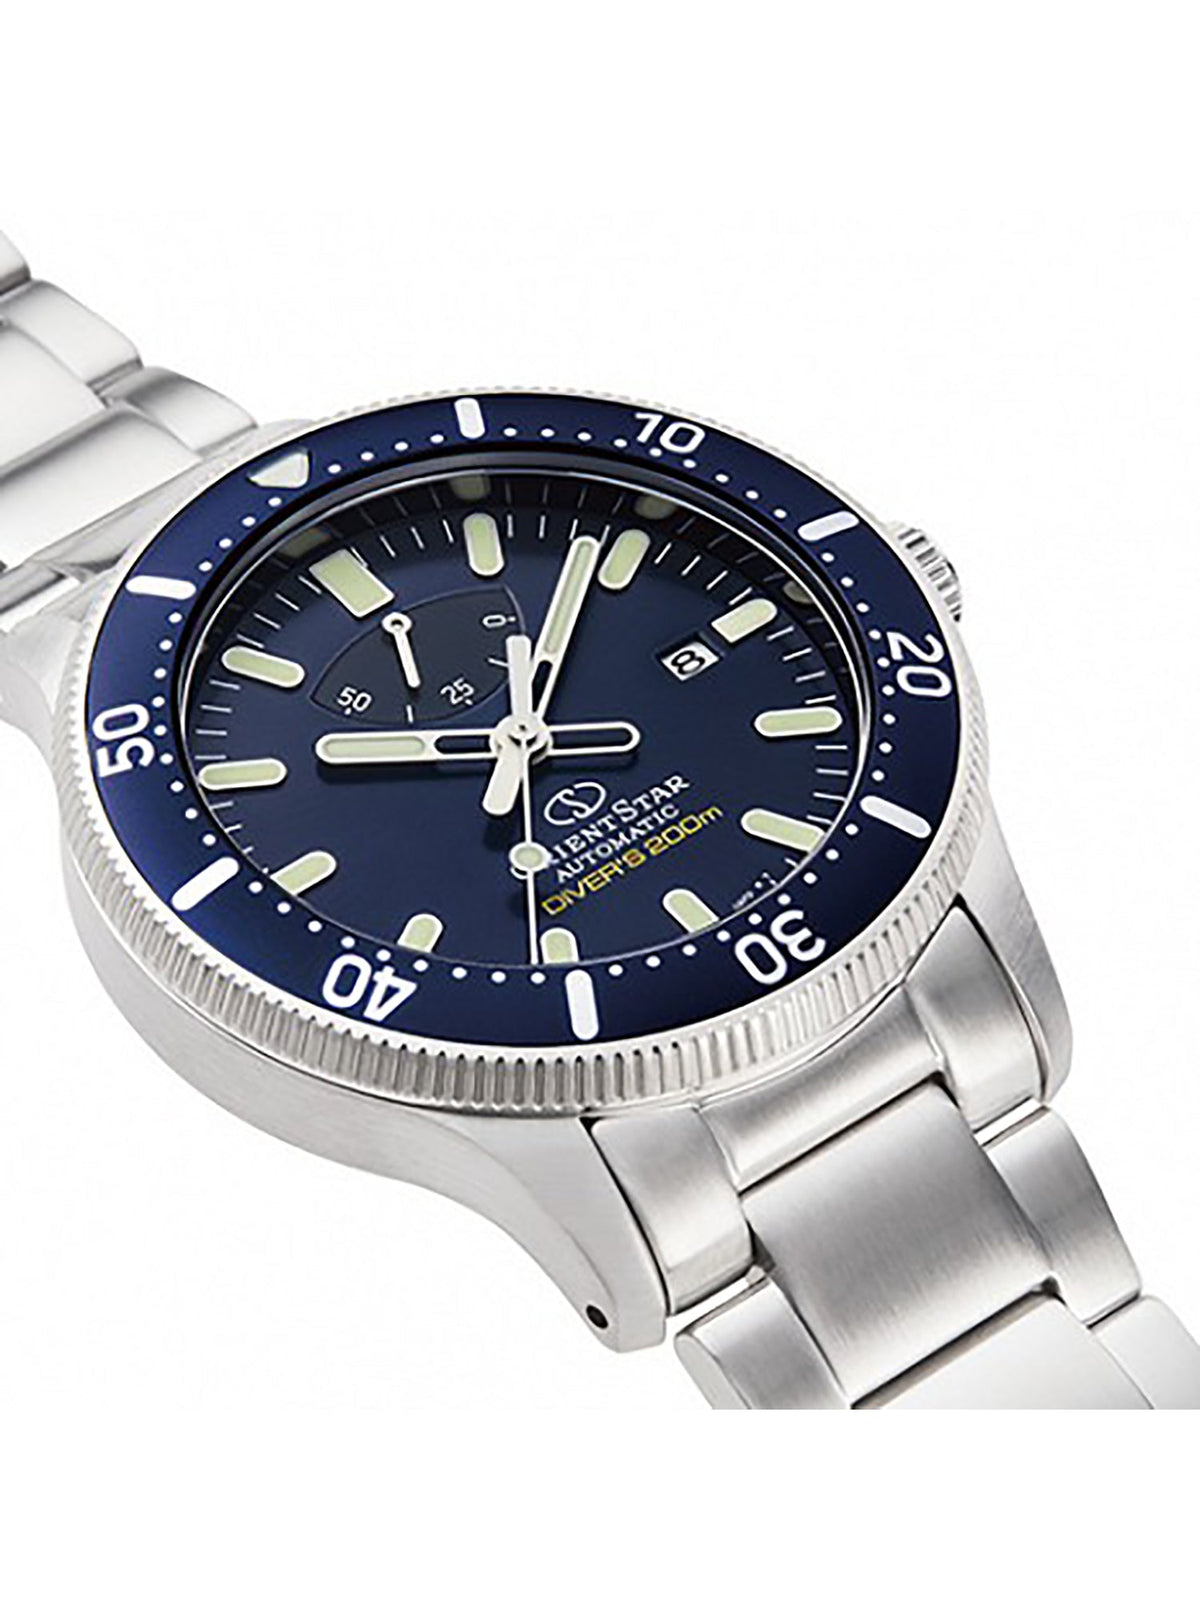 ORIENT STAR SPORTS DIVER RK-AU0310L MADE IN JAPAN JDMjapan-select4906006285075WRISTWATCHORIENT